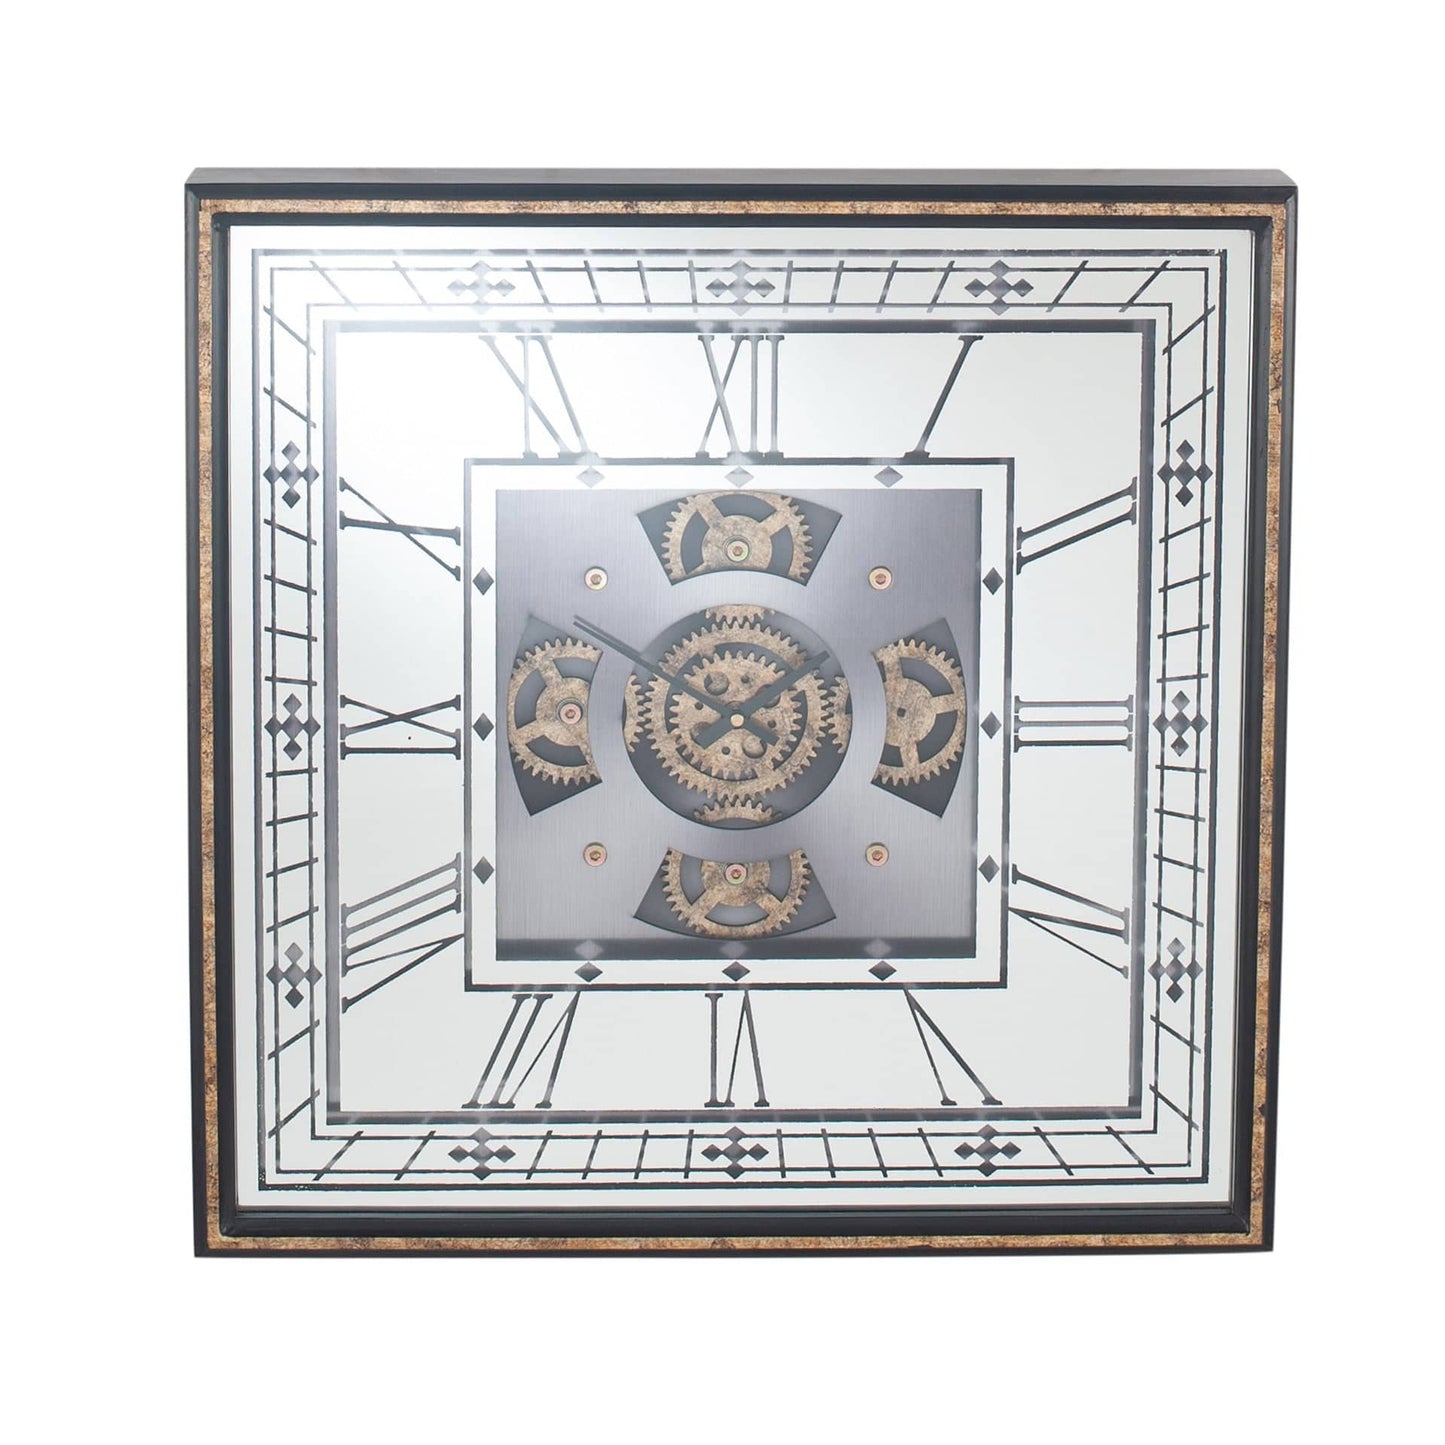 Antique Gold Wood Frame and Mirrored Square Cog Wall Clock for sale - Woodcock and Cavendish